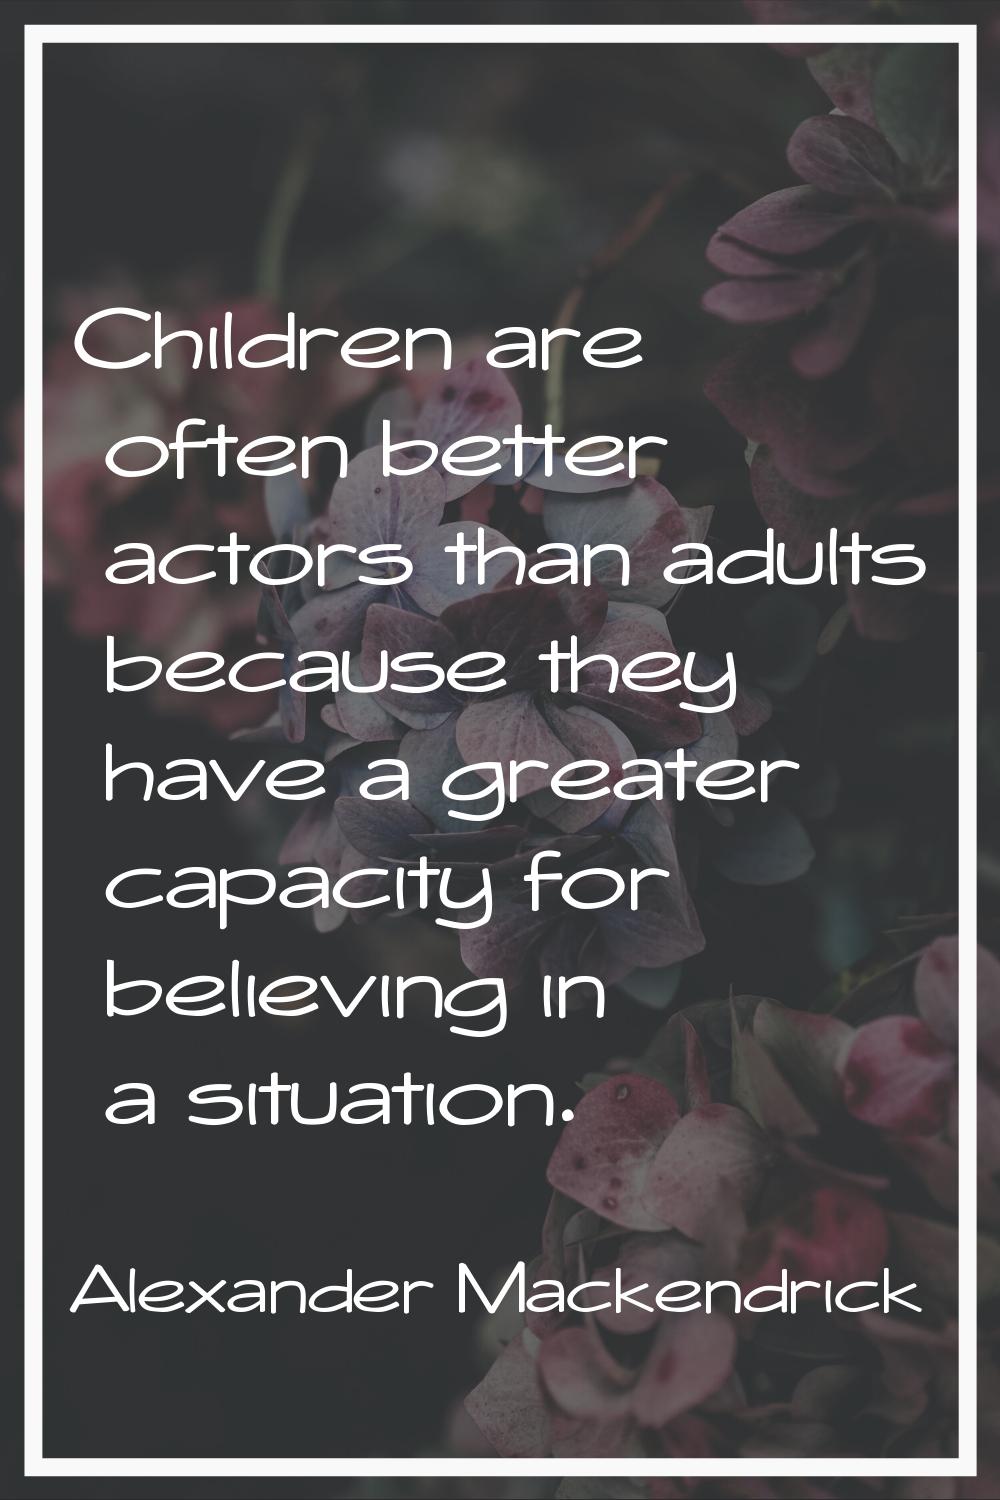 Children are often better actors than adults because they have a greater capacity for believing in 